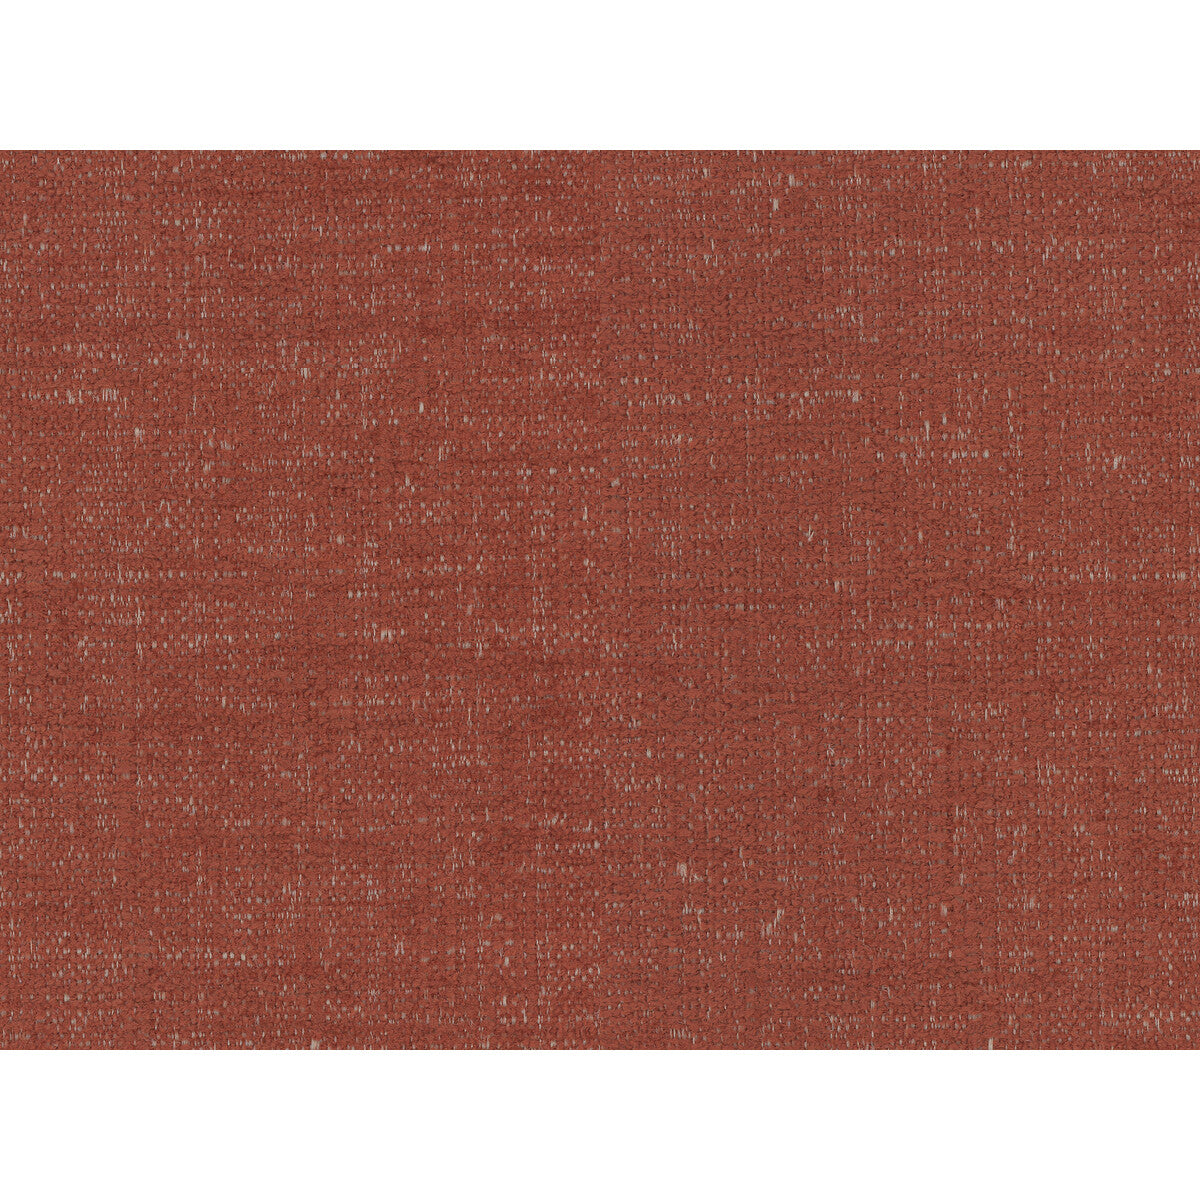 Kravet Smart fabric in 34622-24 color - pattern 34622.24.0 - by Kravet Smart in the Performance Crypton Home collection